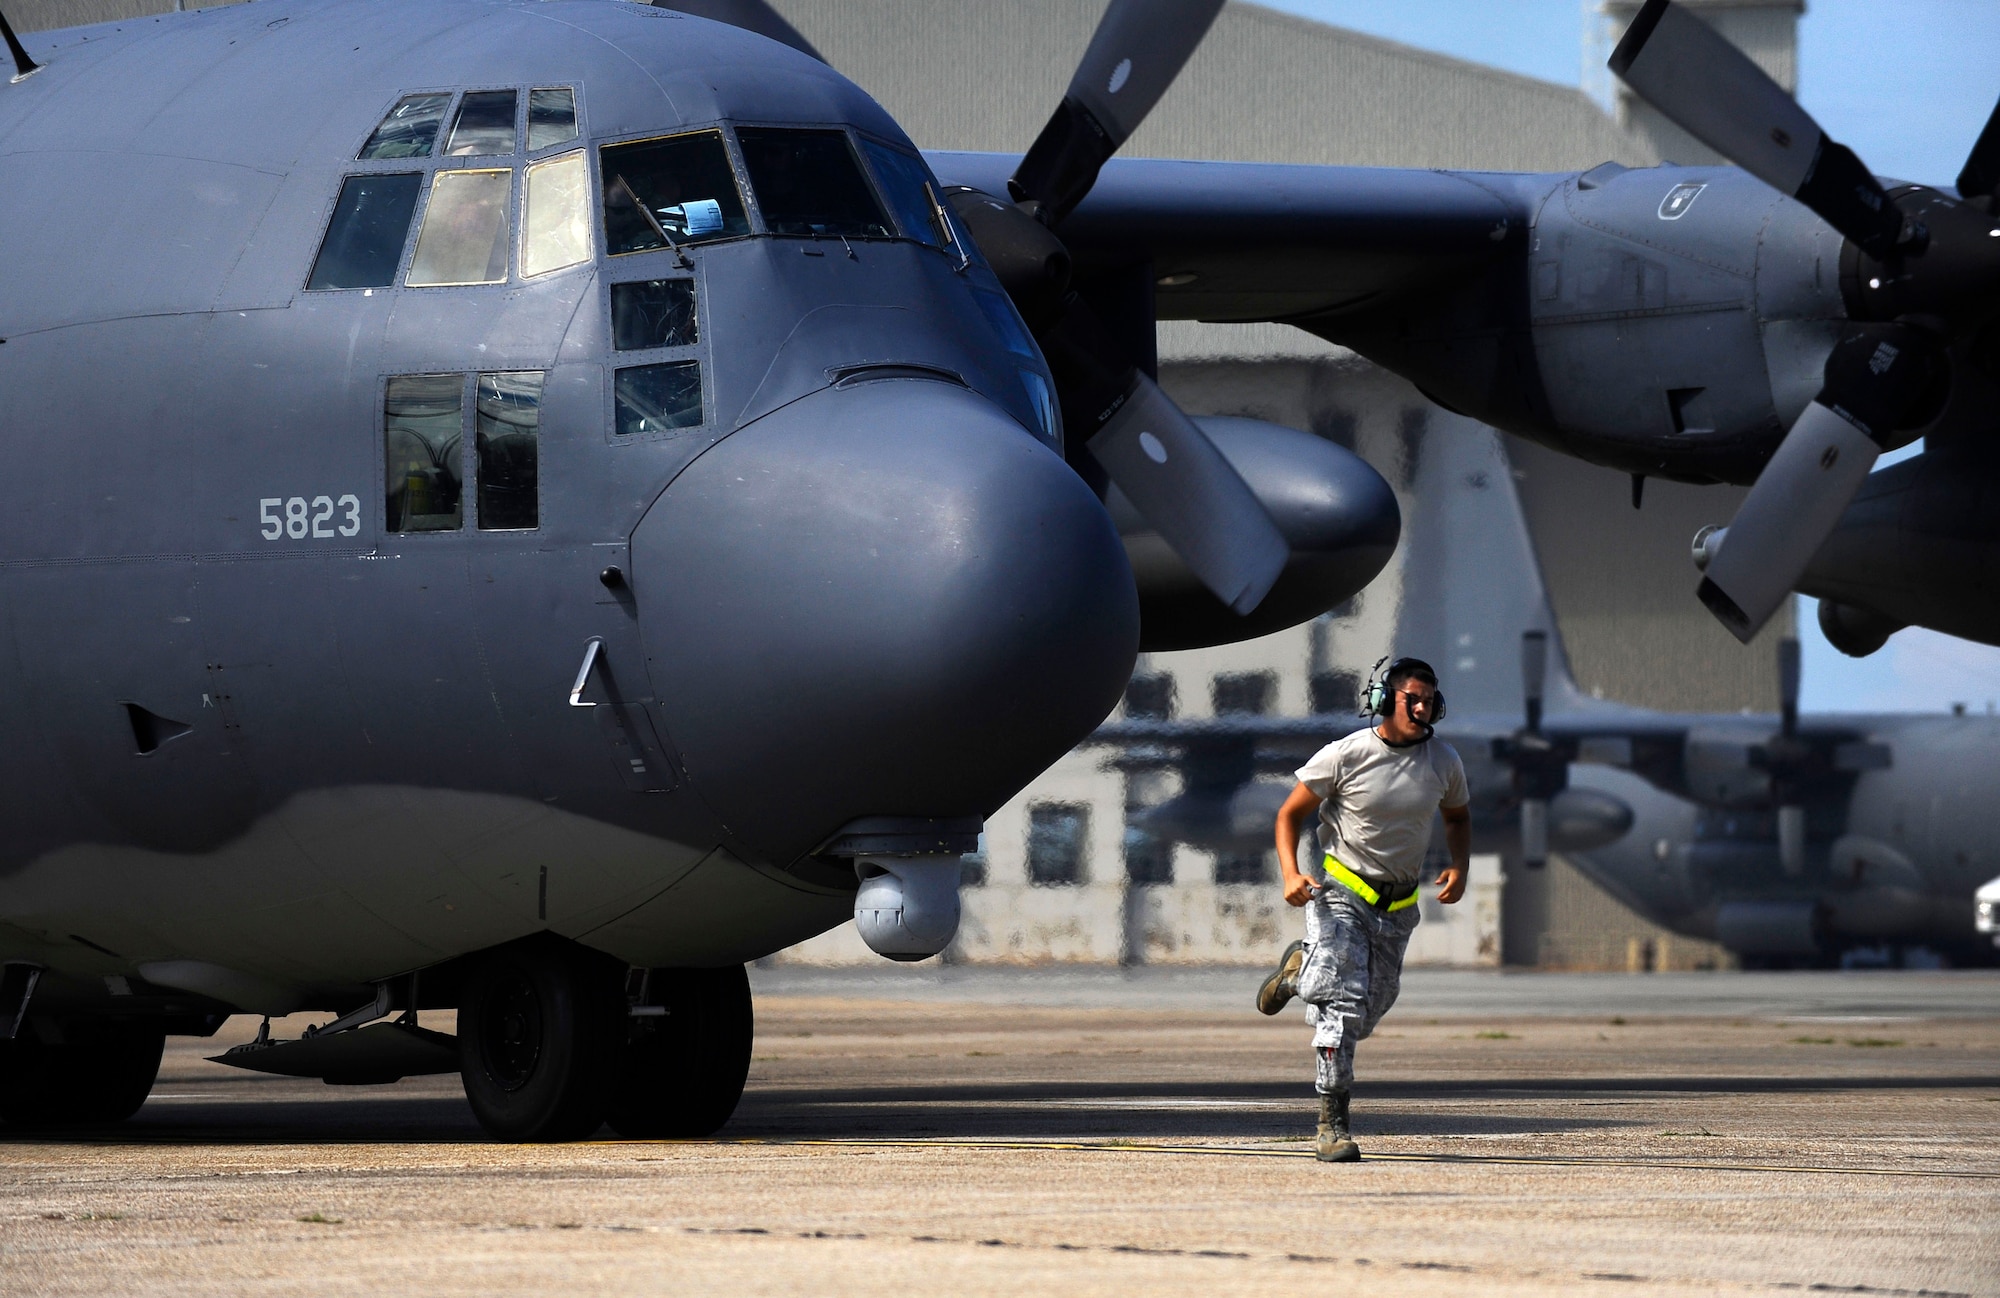 U.S. Air Force Senior Airman Jarred Shockey, 1st Special Operations Maintenance Squadron crew chief, runs to get in place as an MC-130P Combat Shadow finishes preflight checks during an exercise on the flightline at Eglin Air Force Base, Fla., July 25, 2011.  As a crew chief, Shockey has the responsibility to service the aircraft, perform inspections and advise on any problems with maintaining, servicing and inspecting aircraft. (U.S. Air Force photo by Airman Gustavo Castillo)